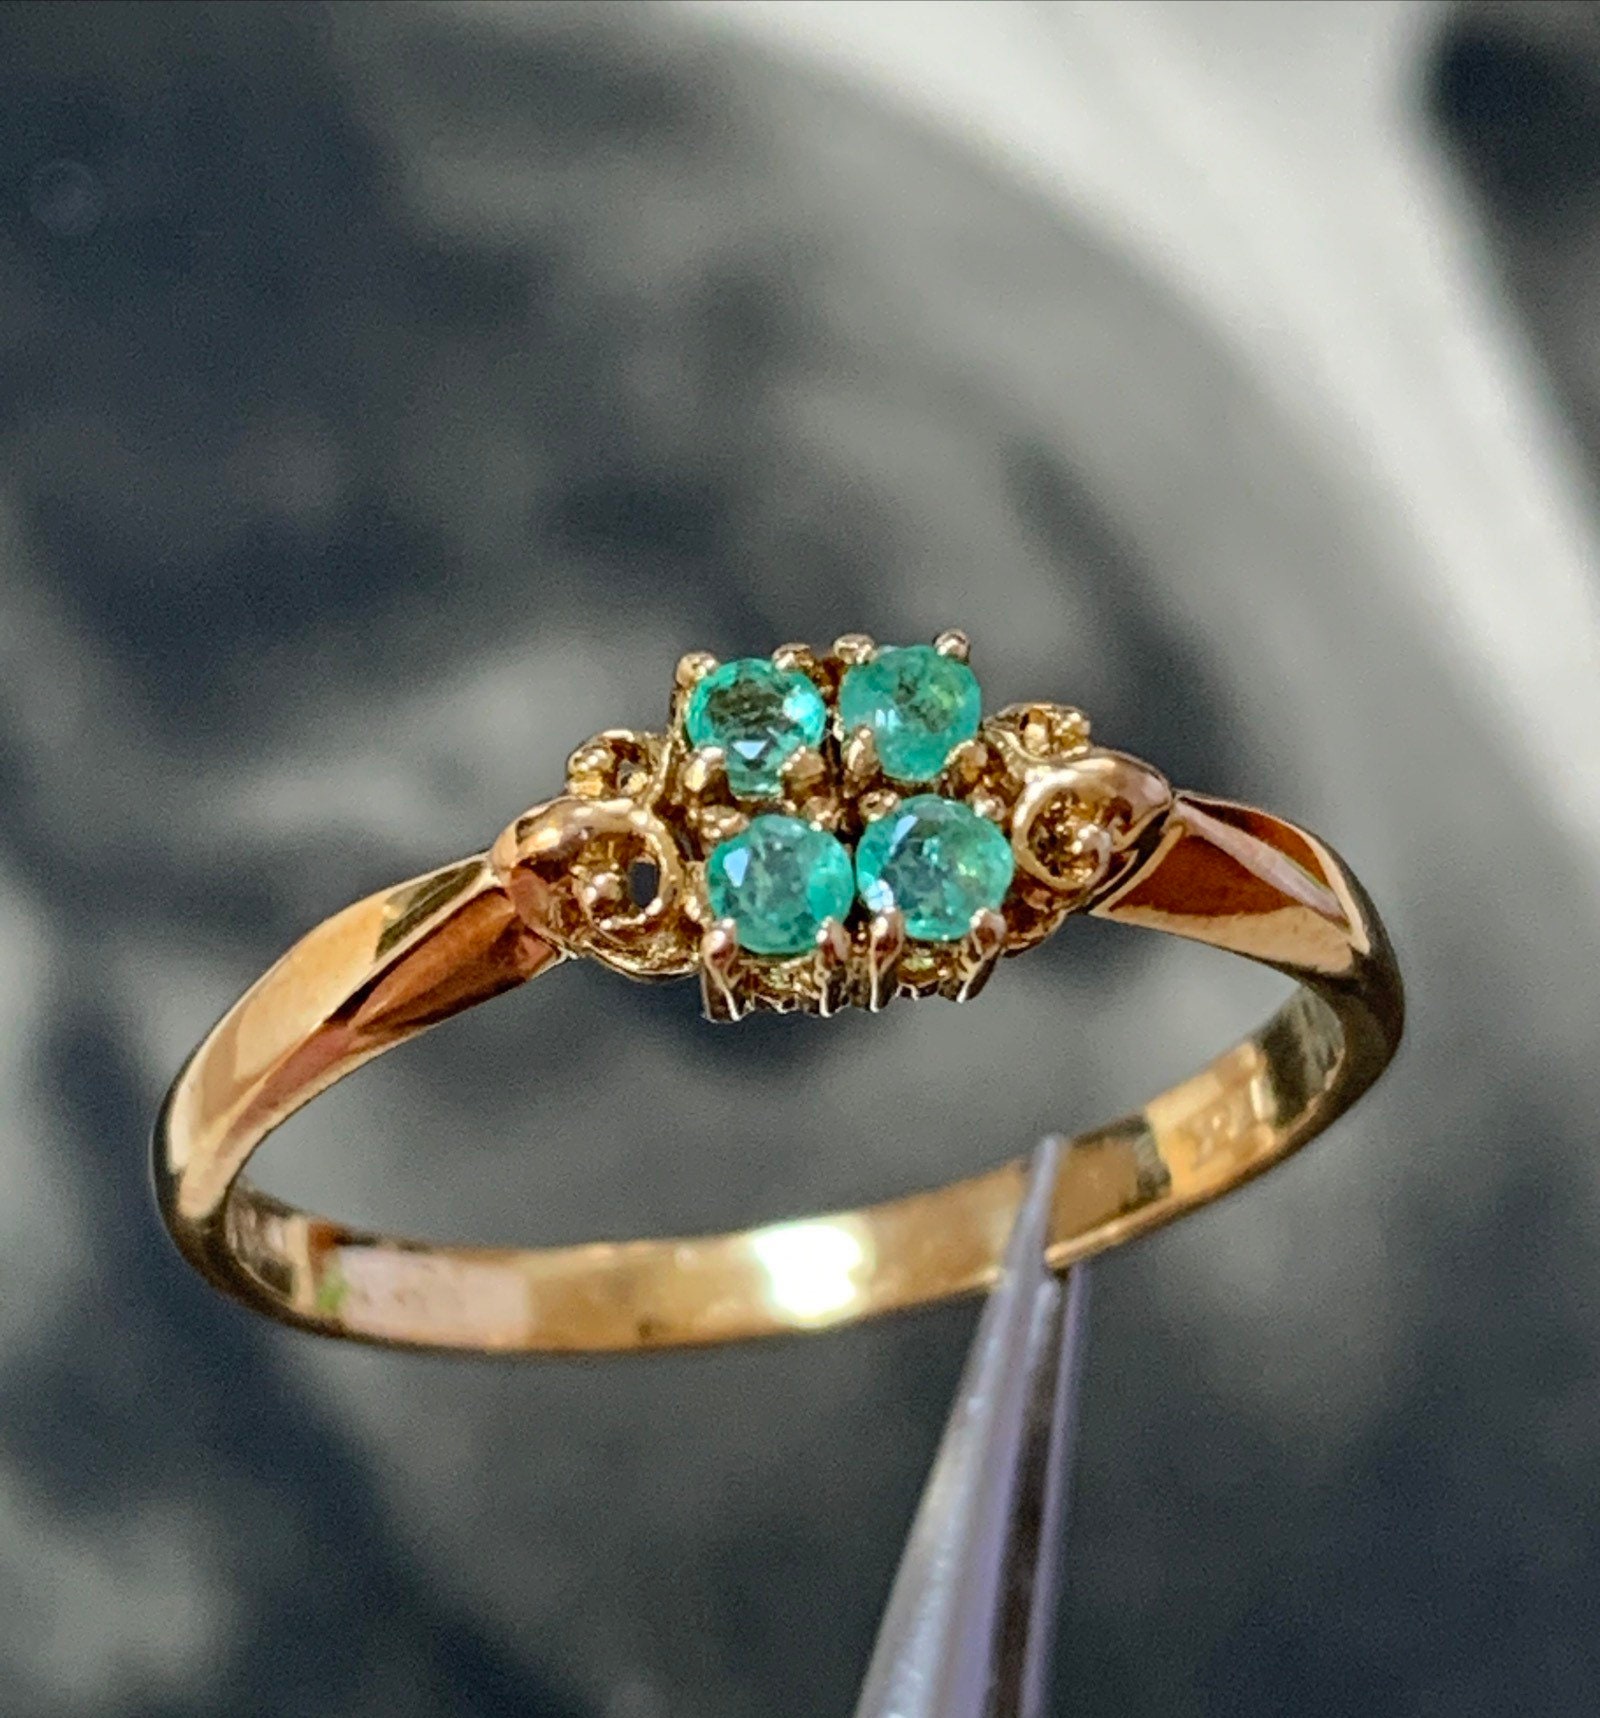 Vintage 9Ct Gold Emerald Ring 4 Stone Square Cluster Hallmarked. A Lovely Vintage Emerald Ring Set With X Round Facet Cut Stones